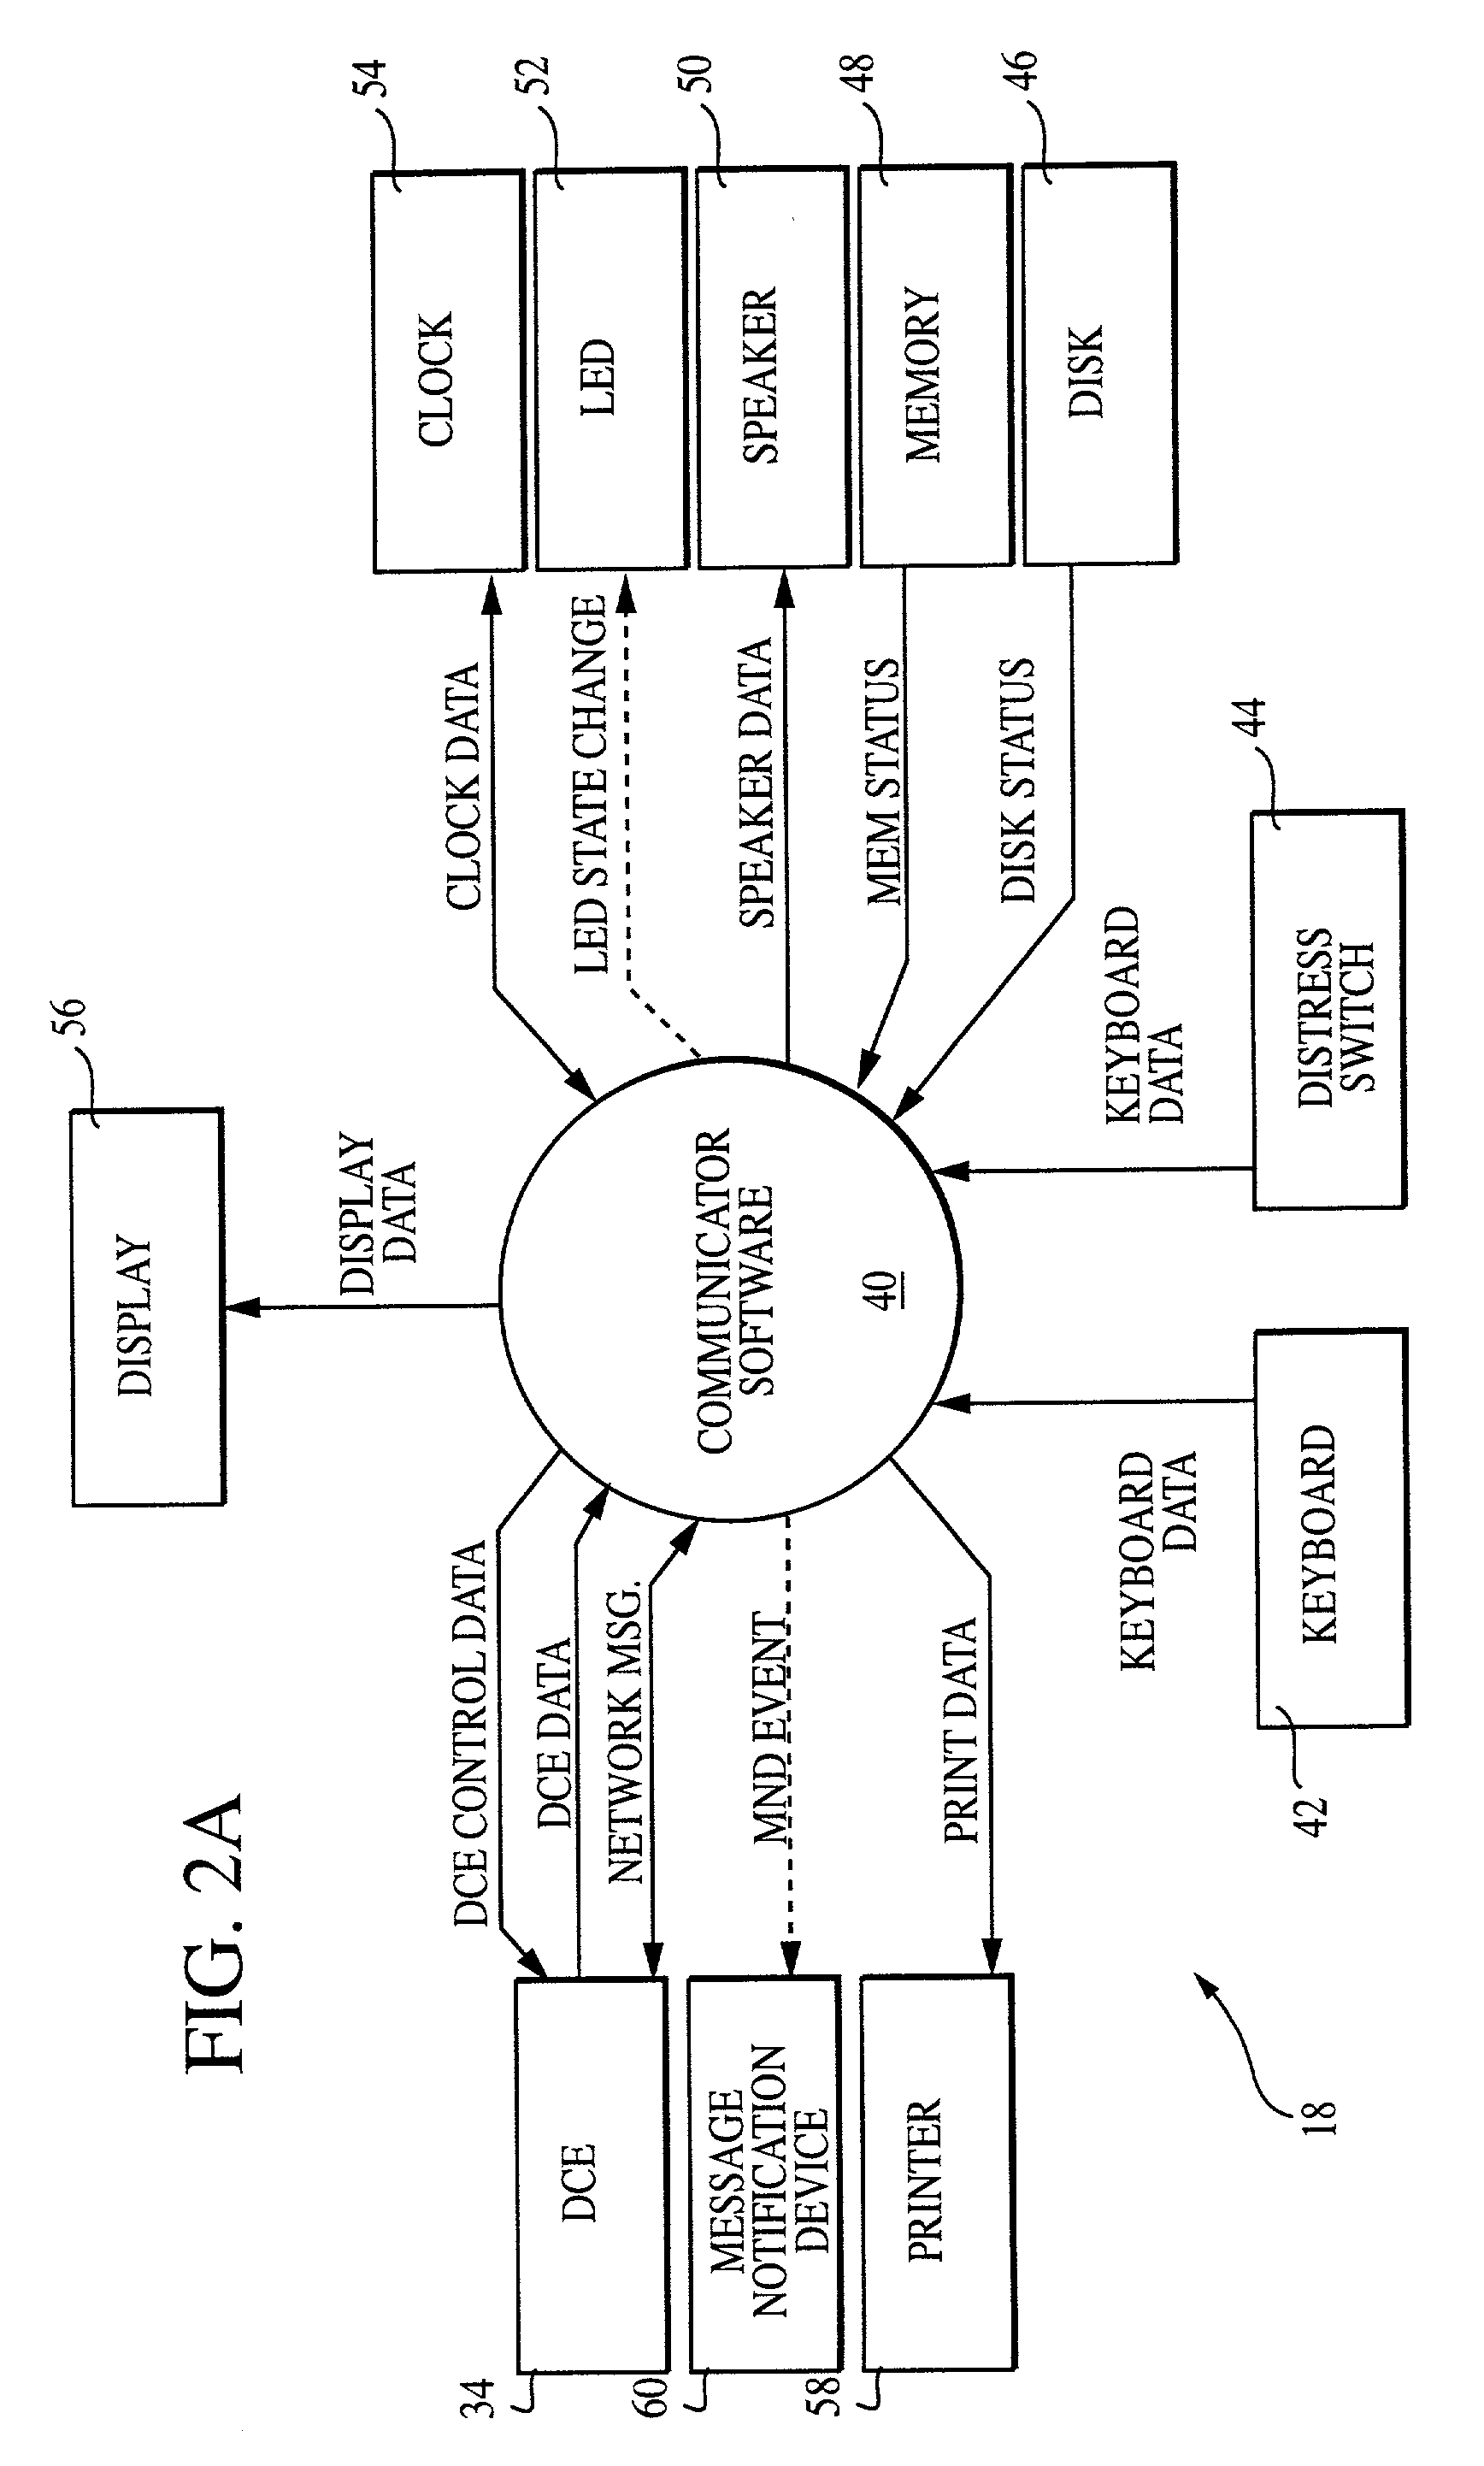 Mobile communications terminal for satellite communications system